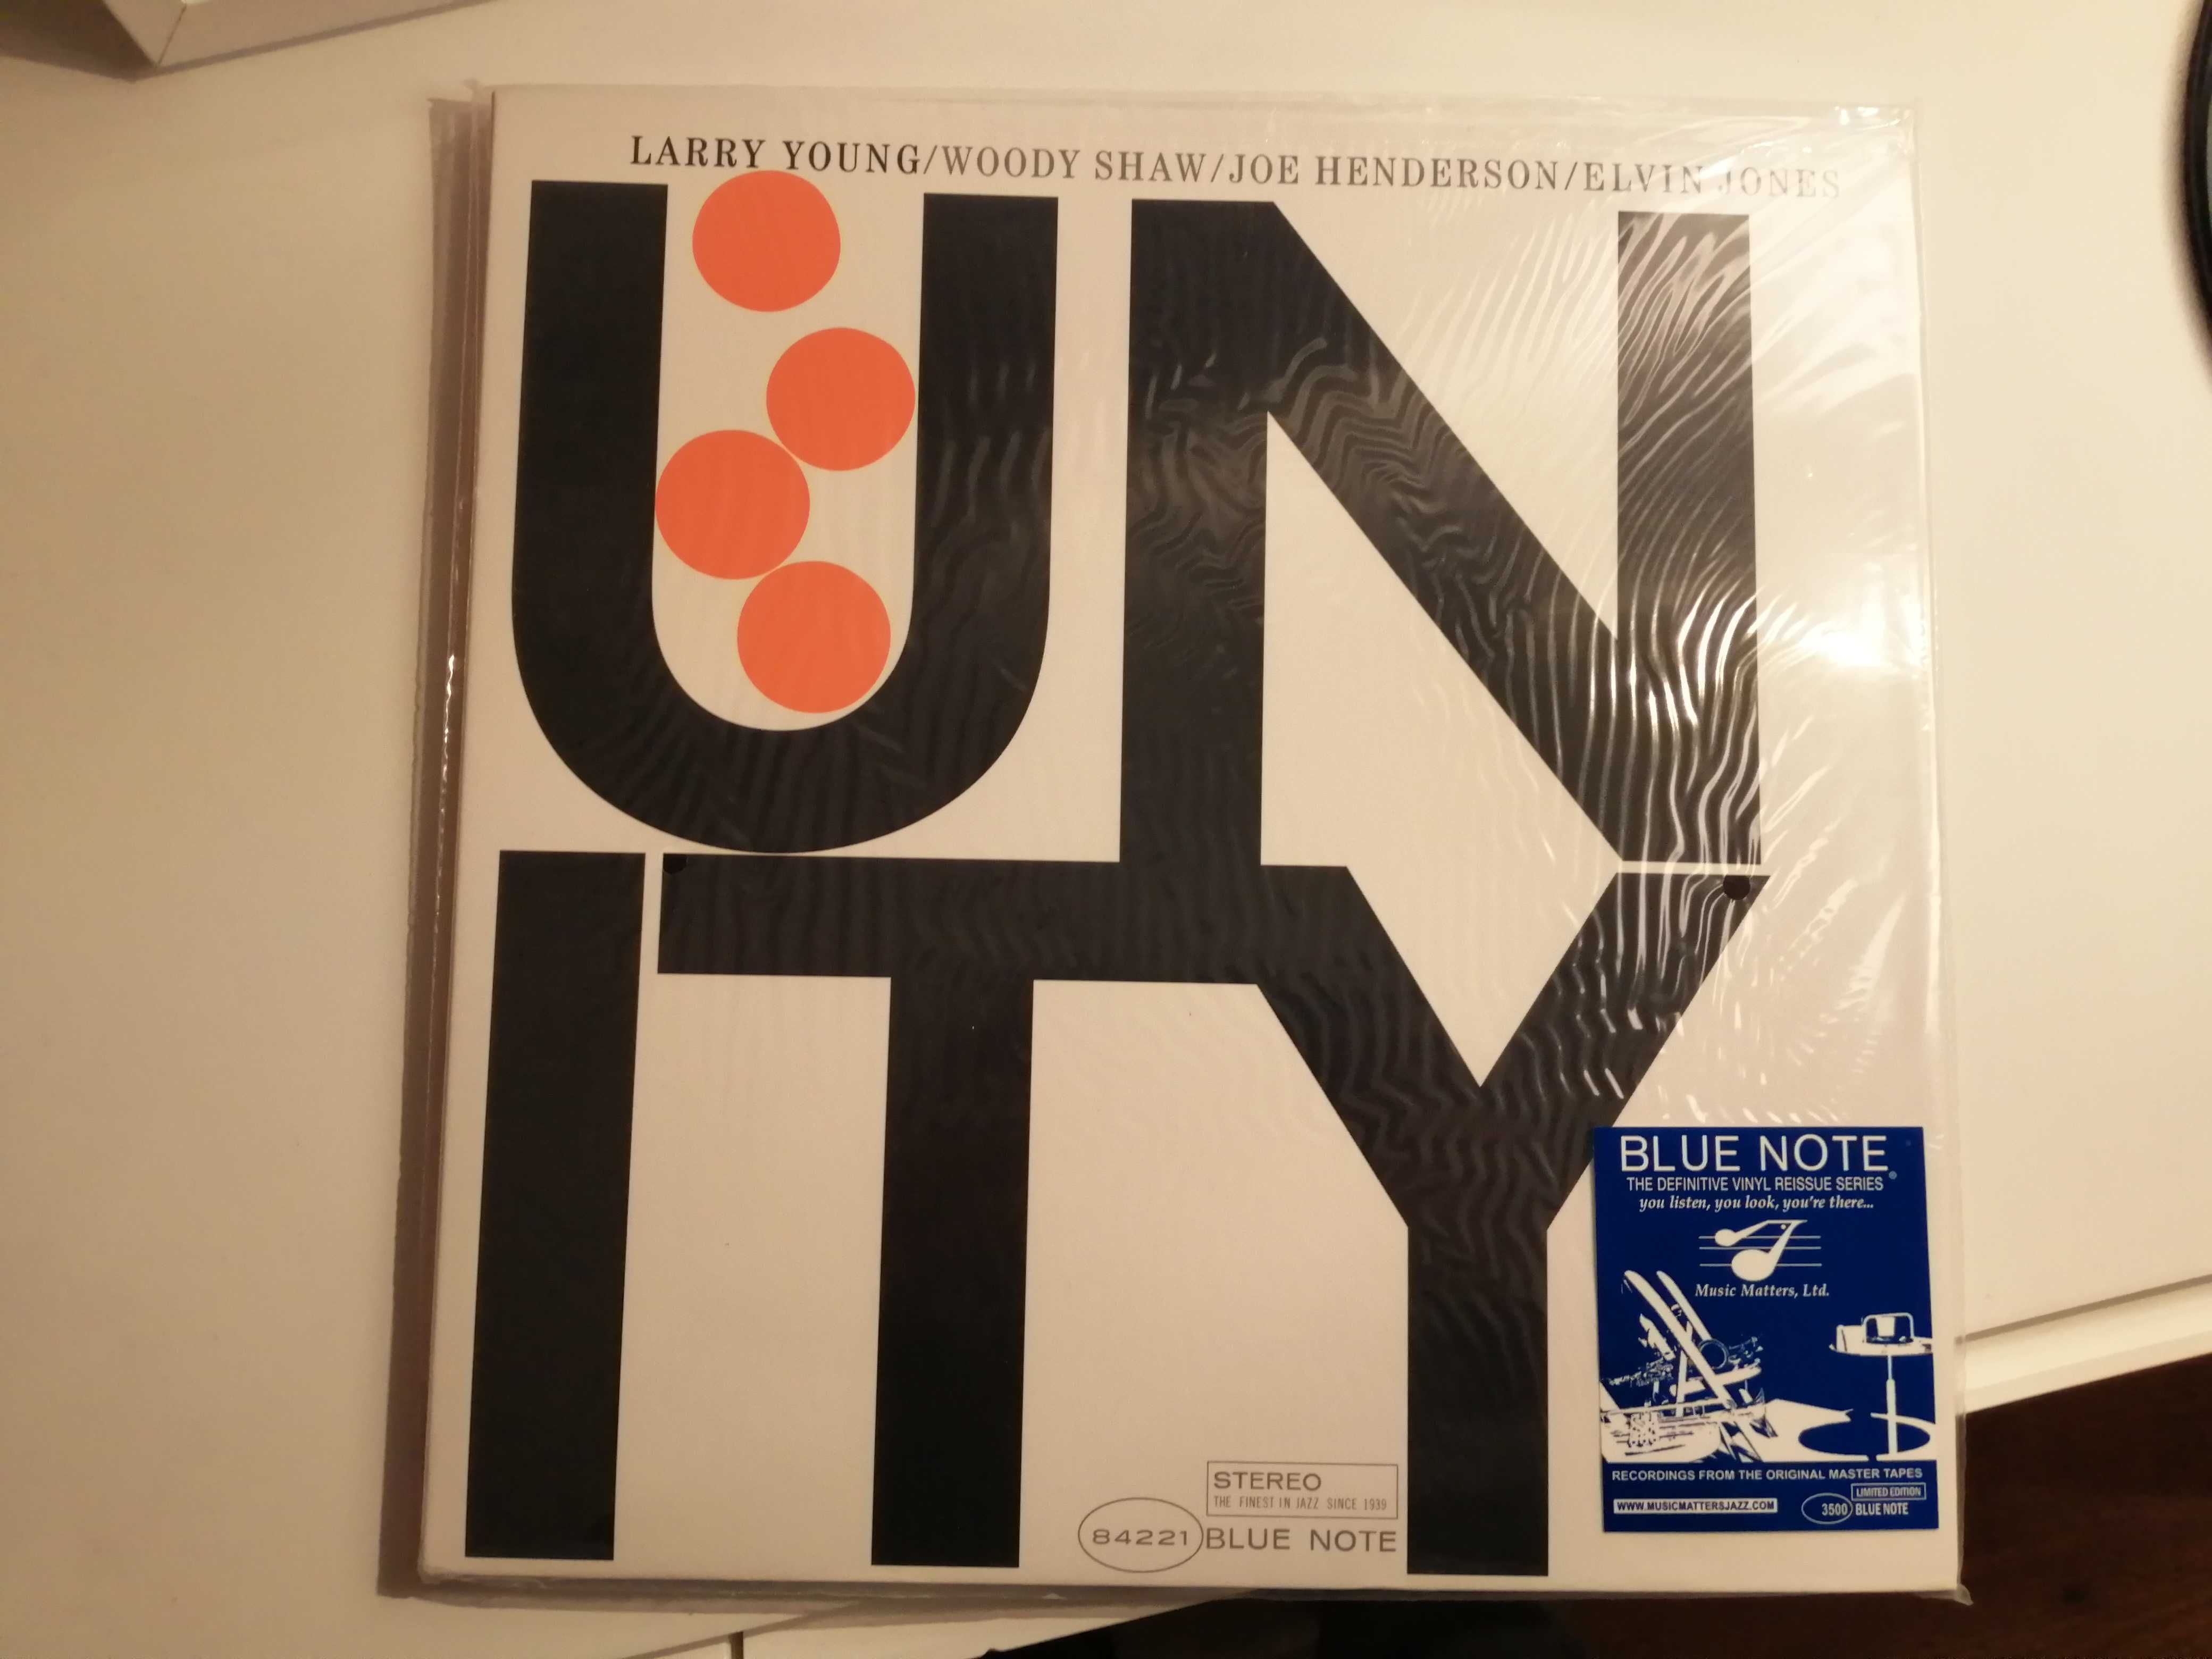 Larry Young - Unity Vinyl Music Matters